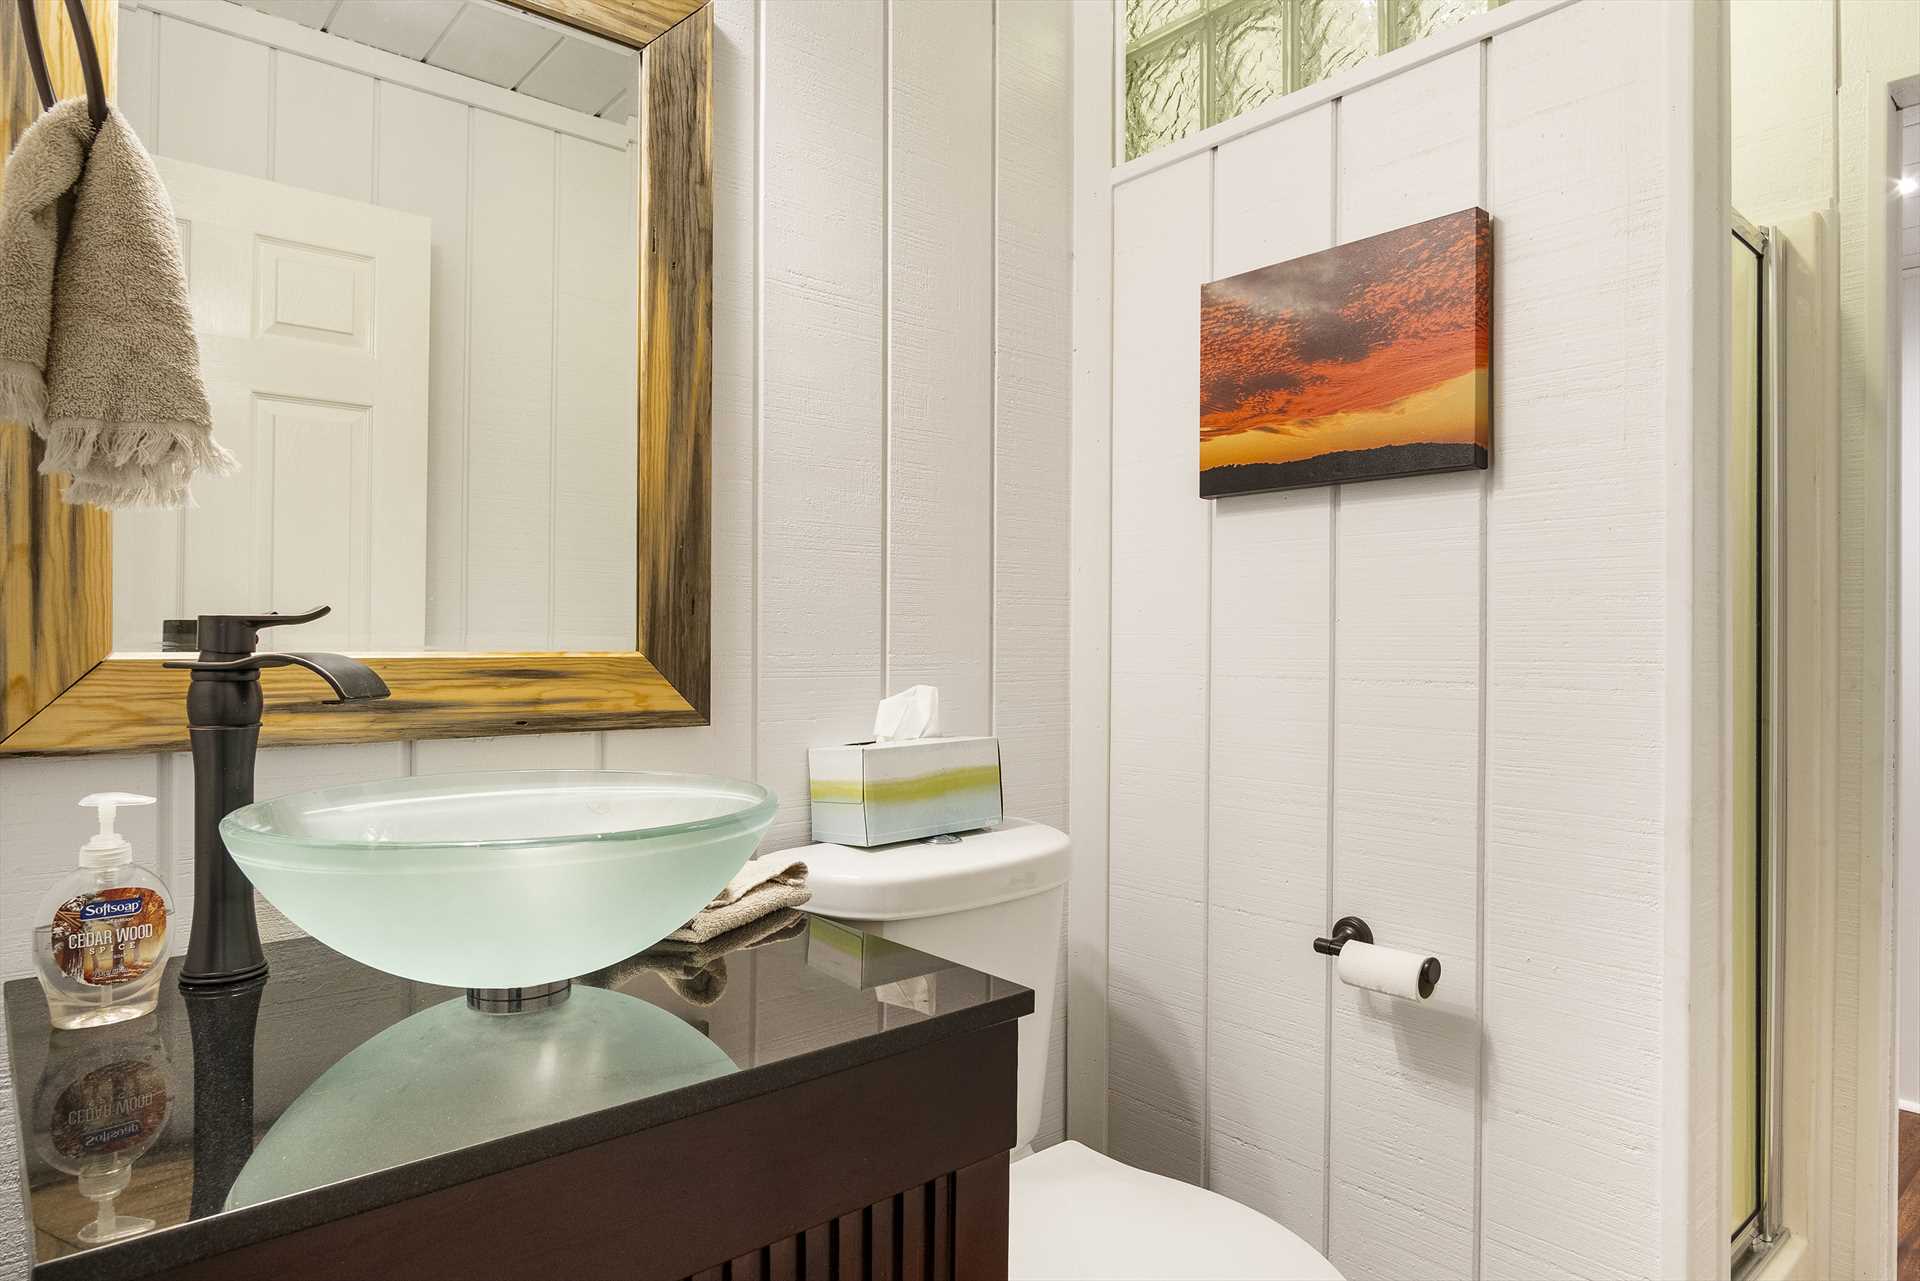                                                 The unique bowl vanity in the master bath is one of the many useful touches that give the Hawk's Nest its charm.